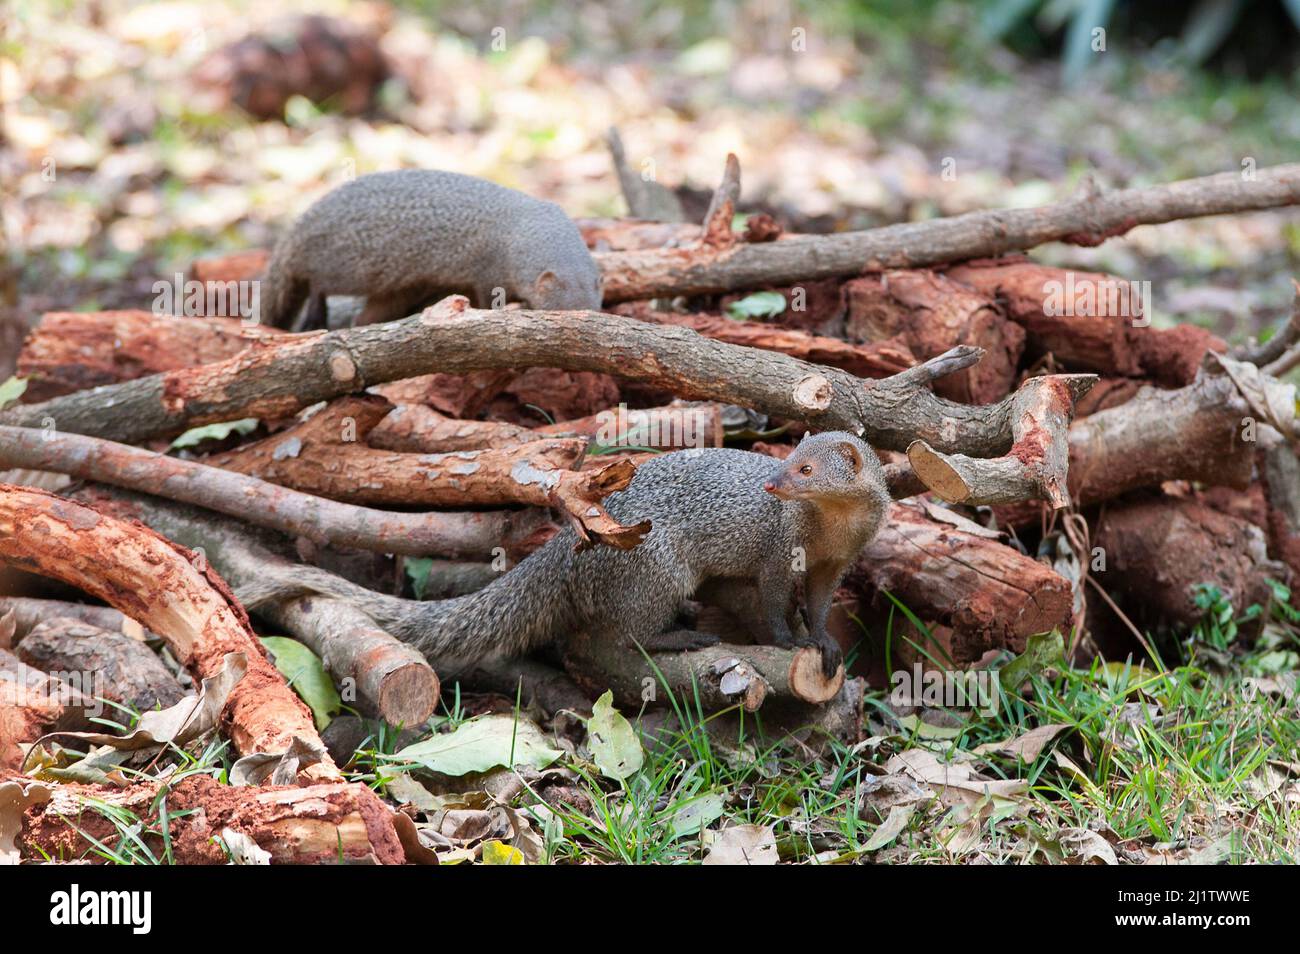 Tamil Nadu, India - March 2022: Indian gray mongooses in a house garden. Stock Photo